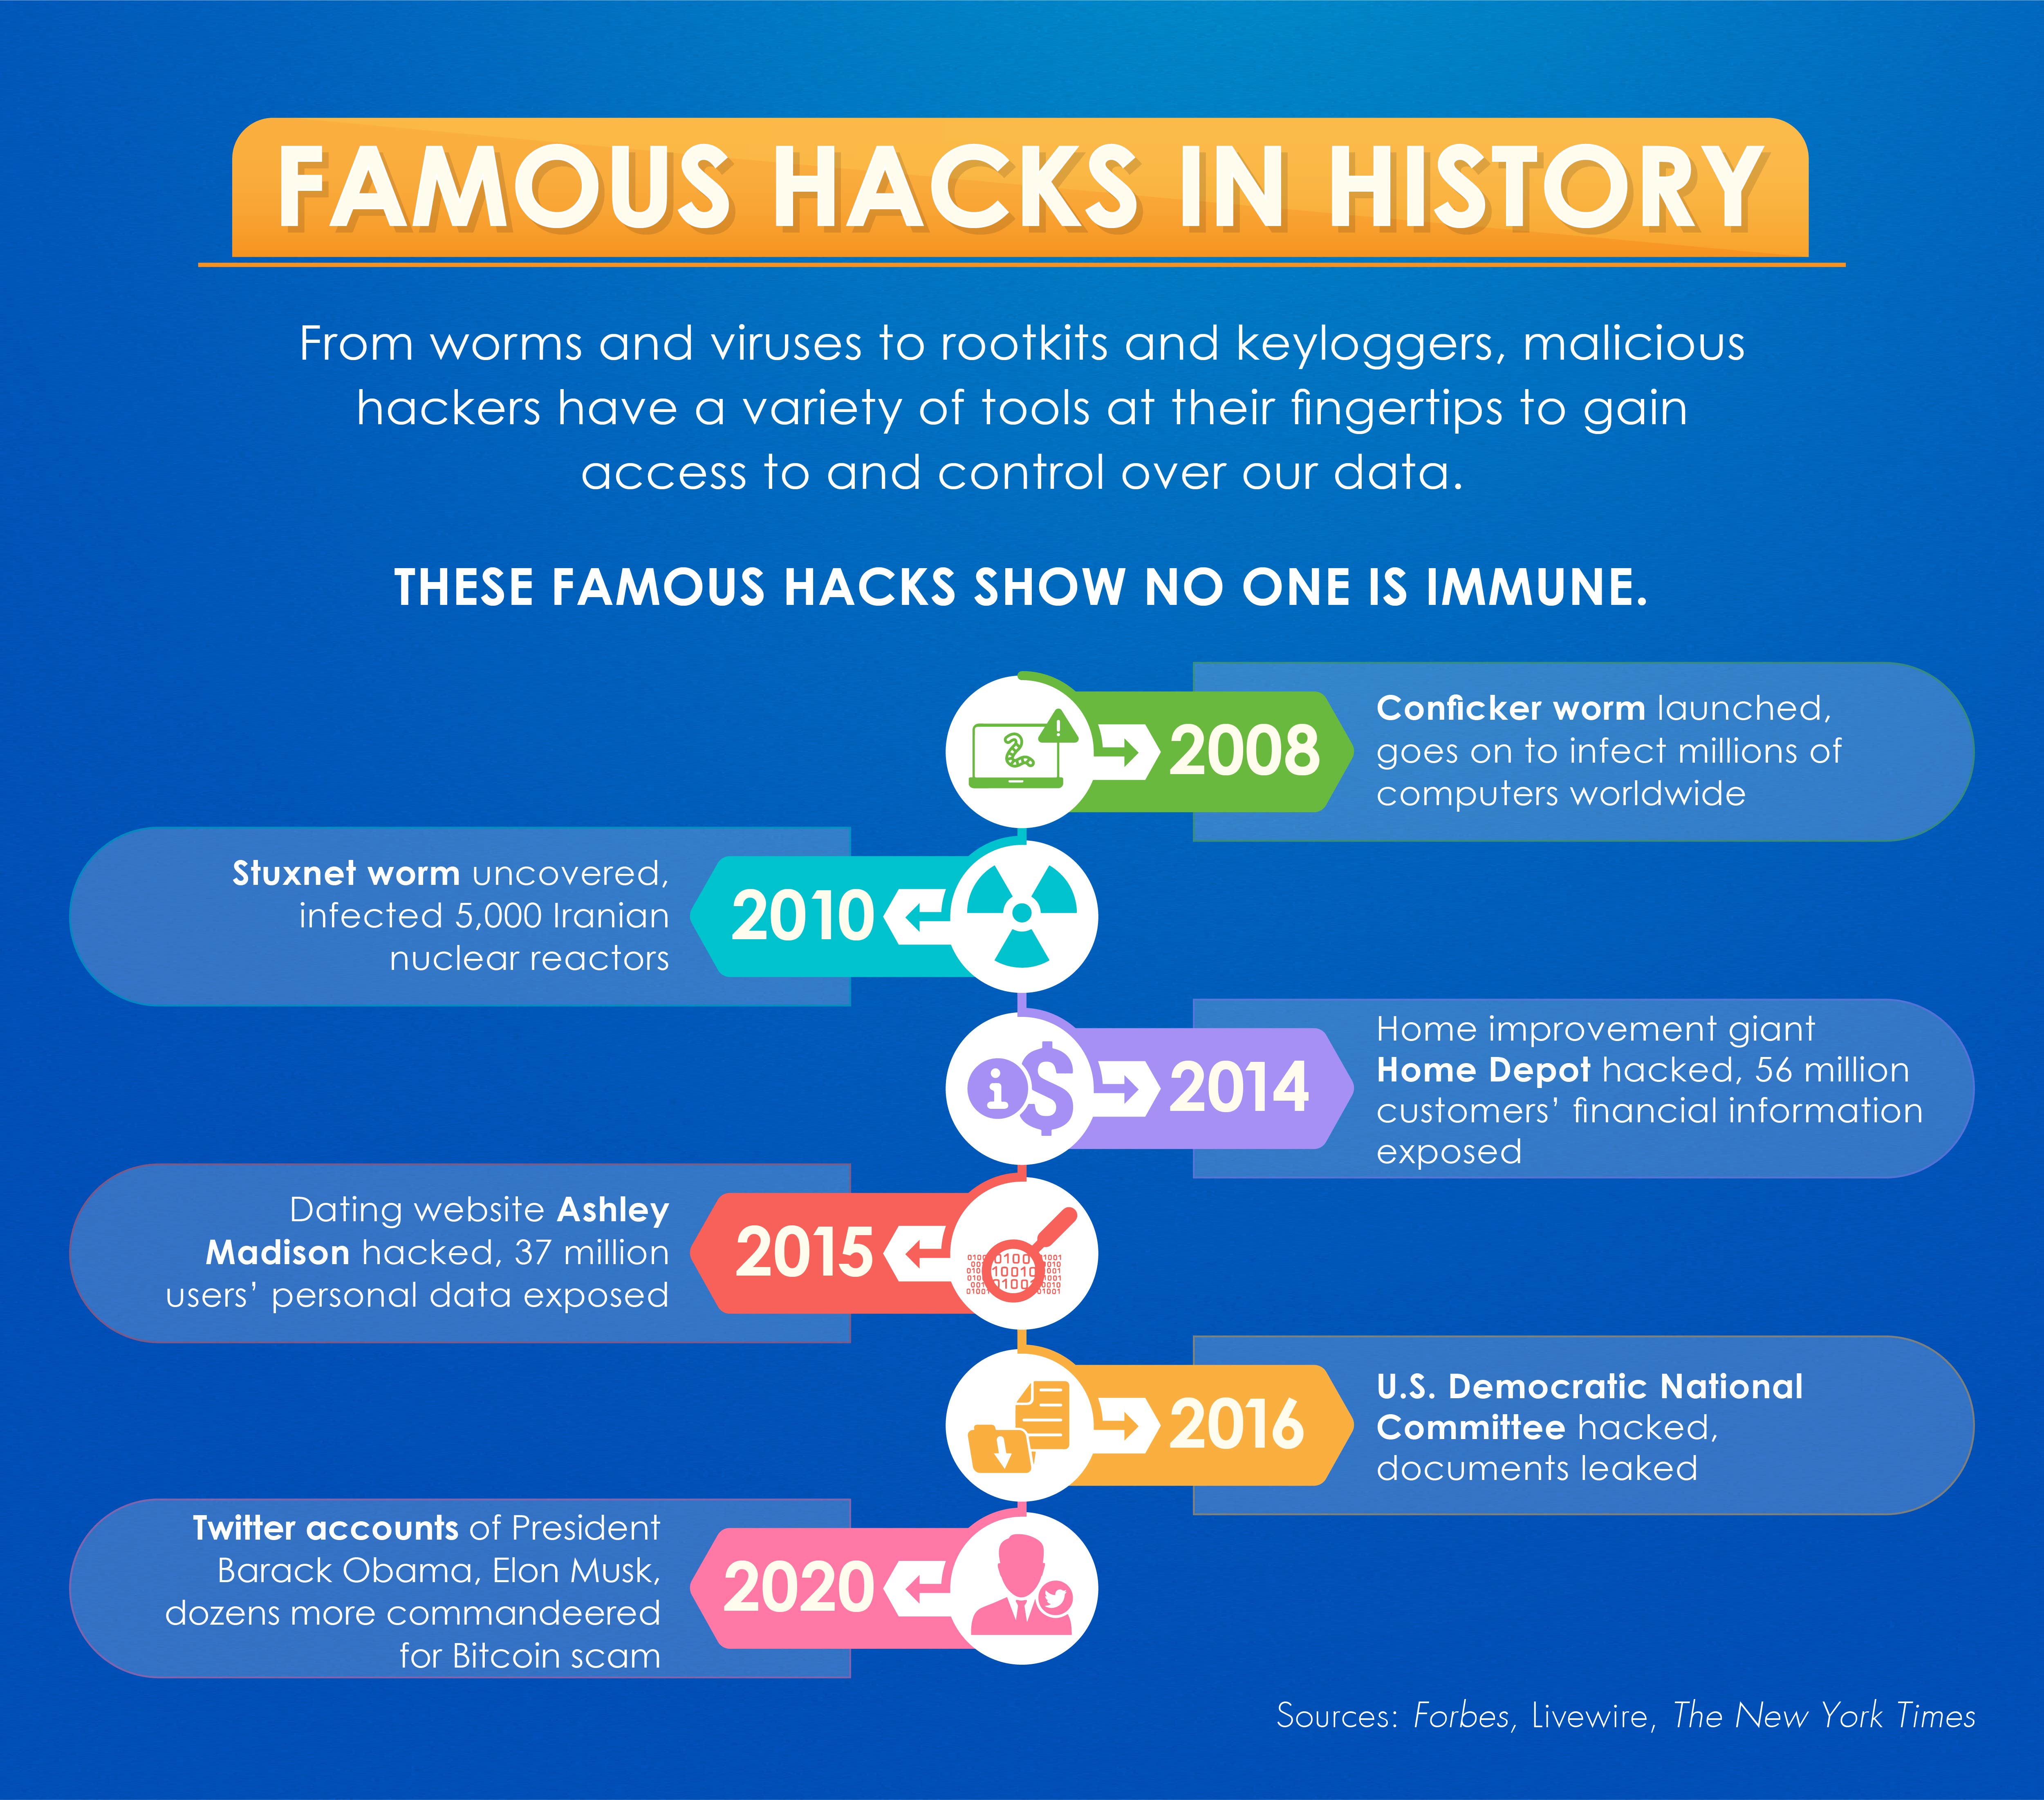 A list of six famous hacks, from 2008 to 2020.